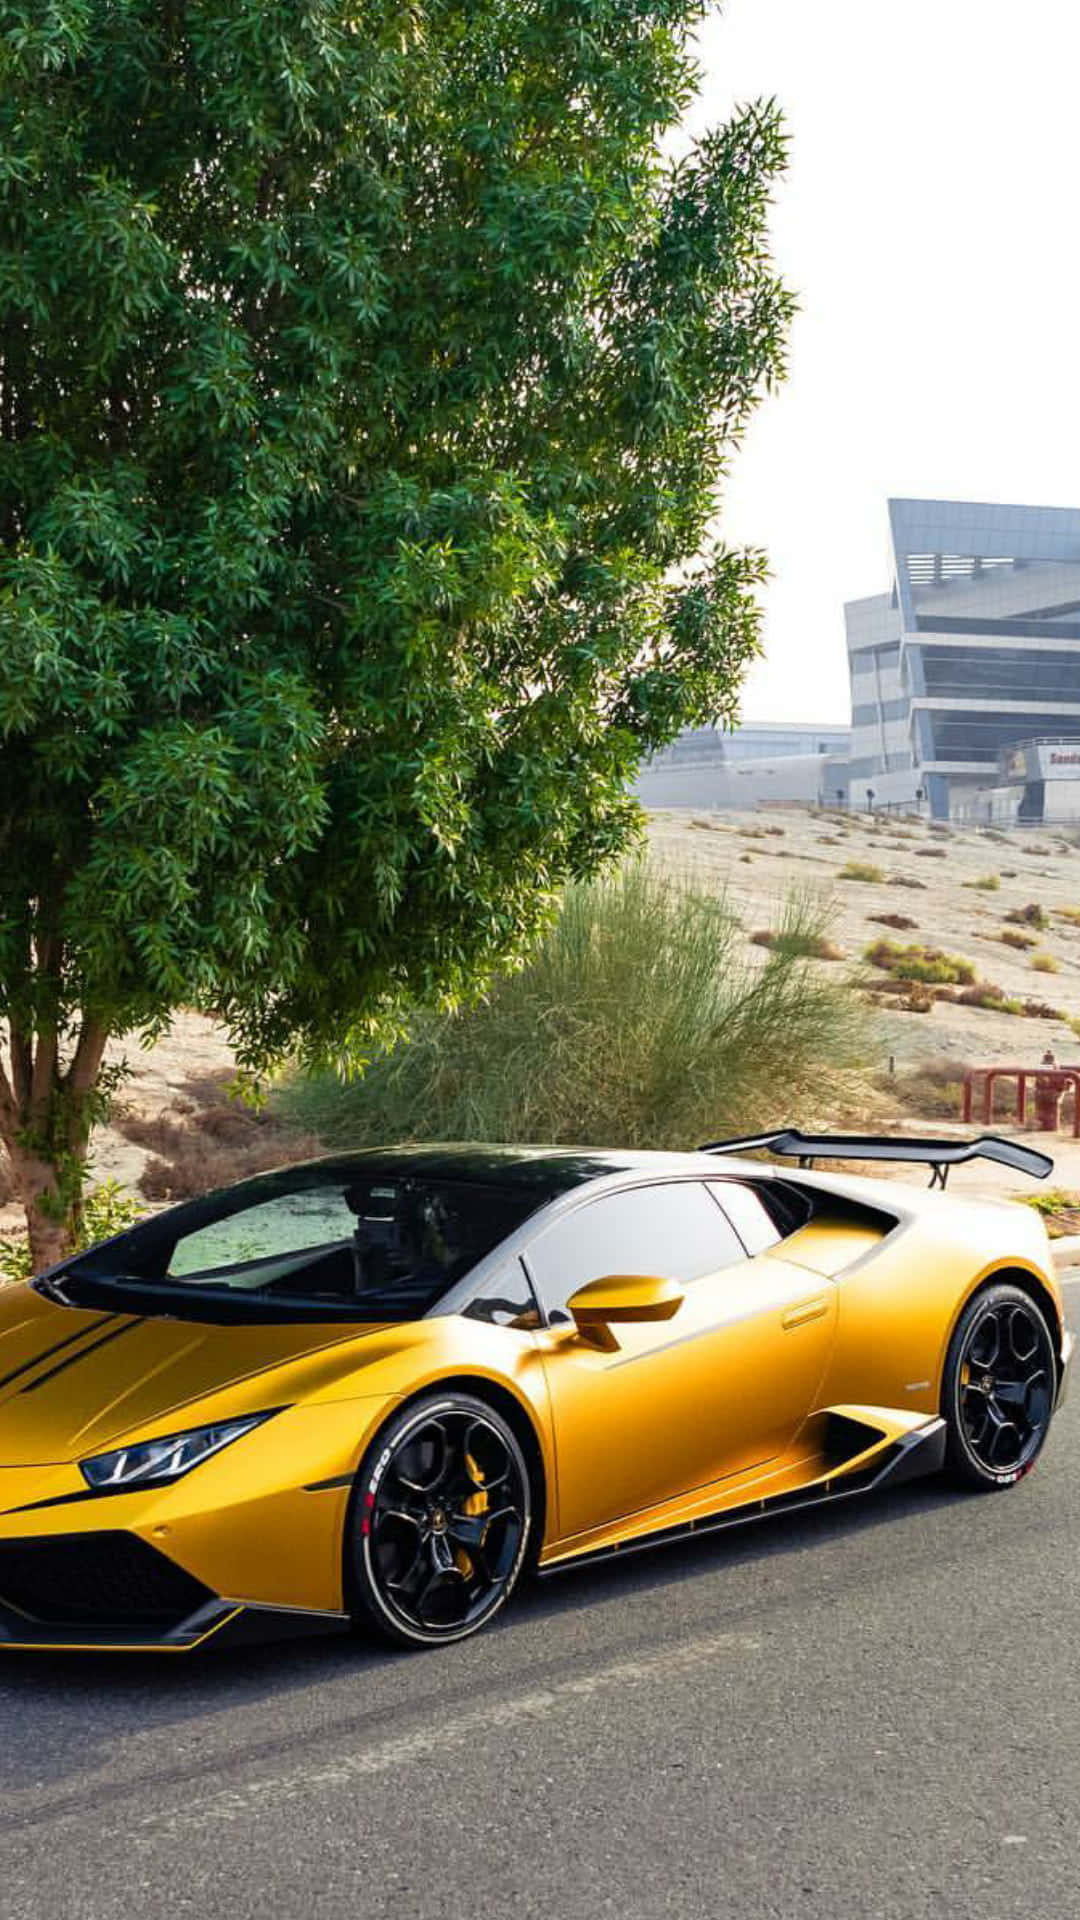 Rev up your style with a luxurious gold Lamborghini. Wallpaper